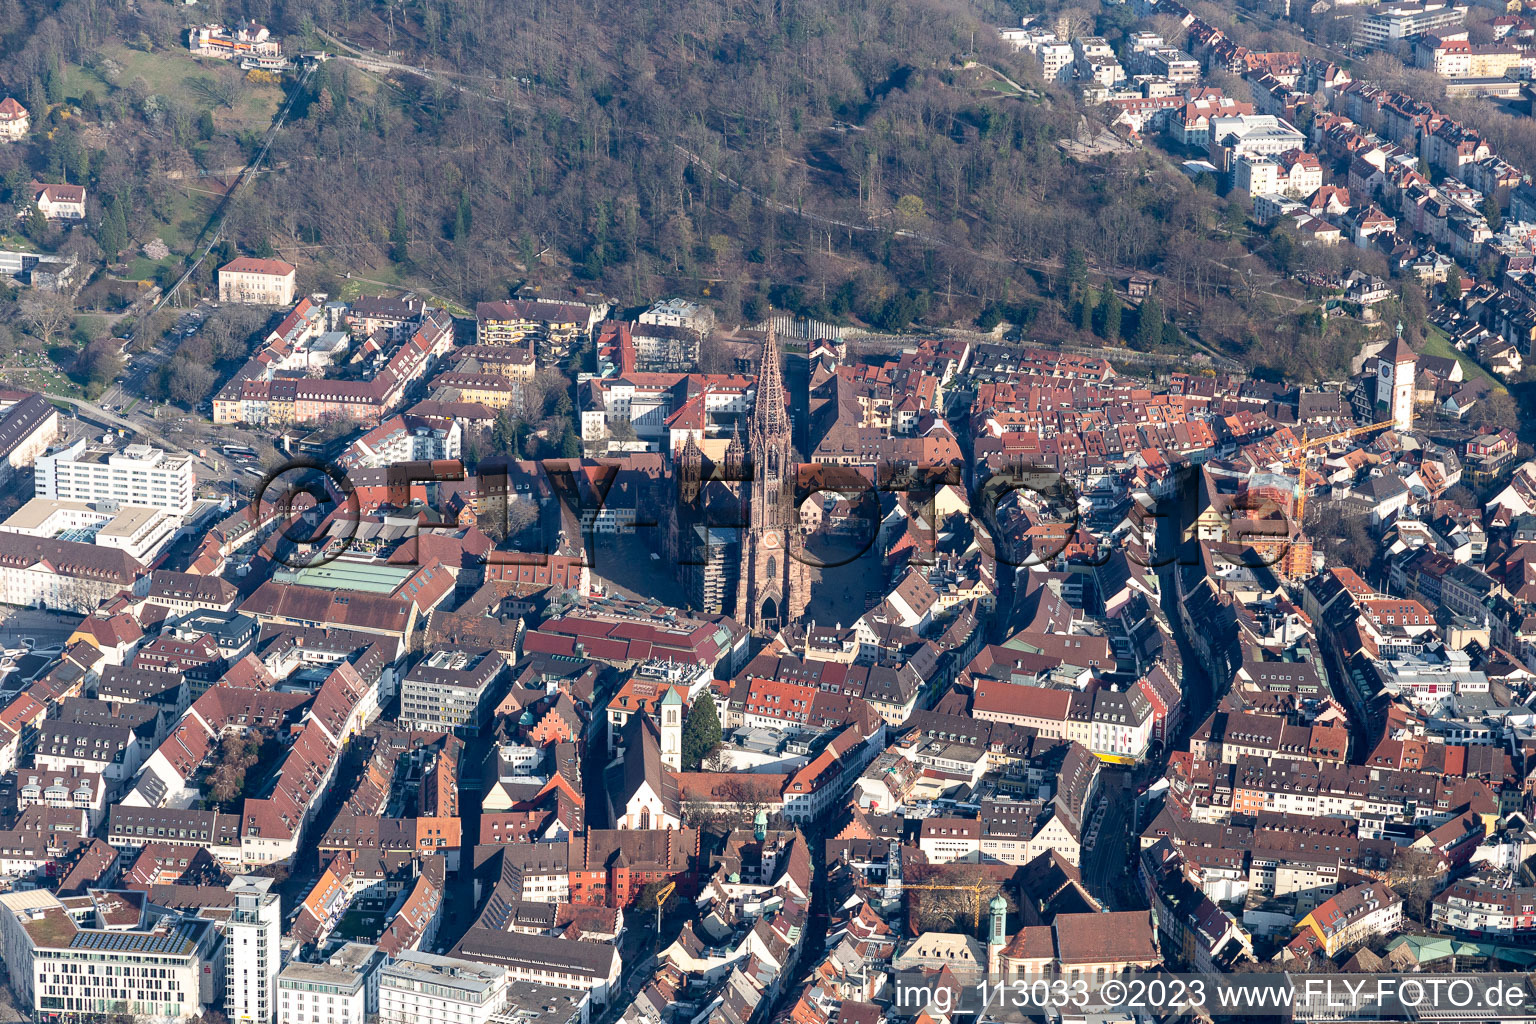 Oblique view of Muenster in the district Altstadt in Freiburg im Breisgau in the state Baden-Wuerttemberg, Germany